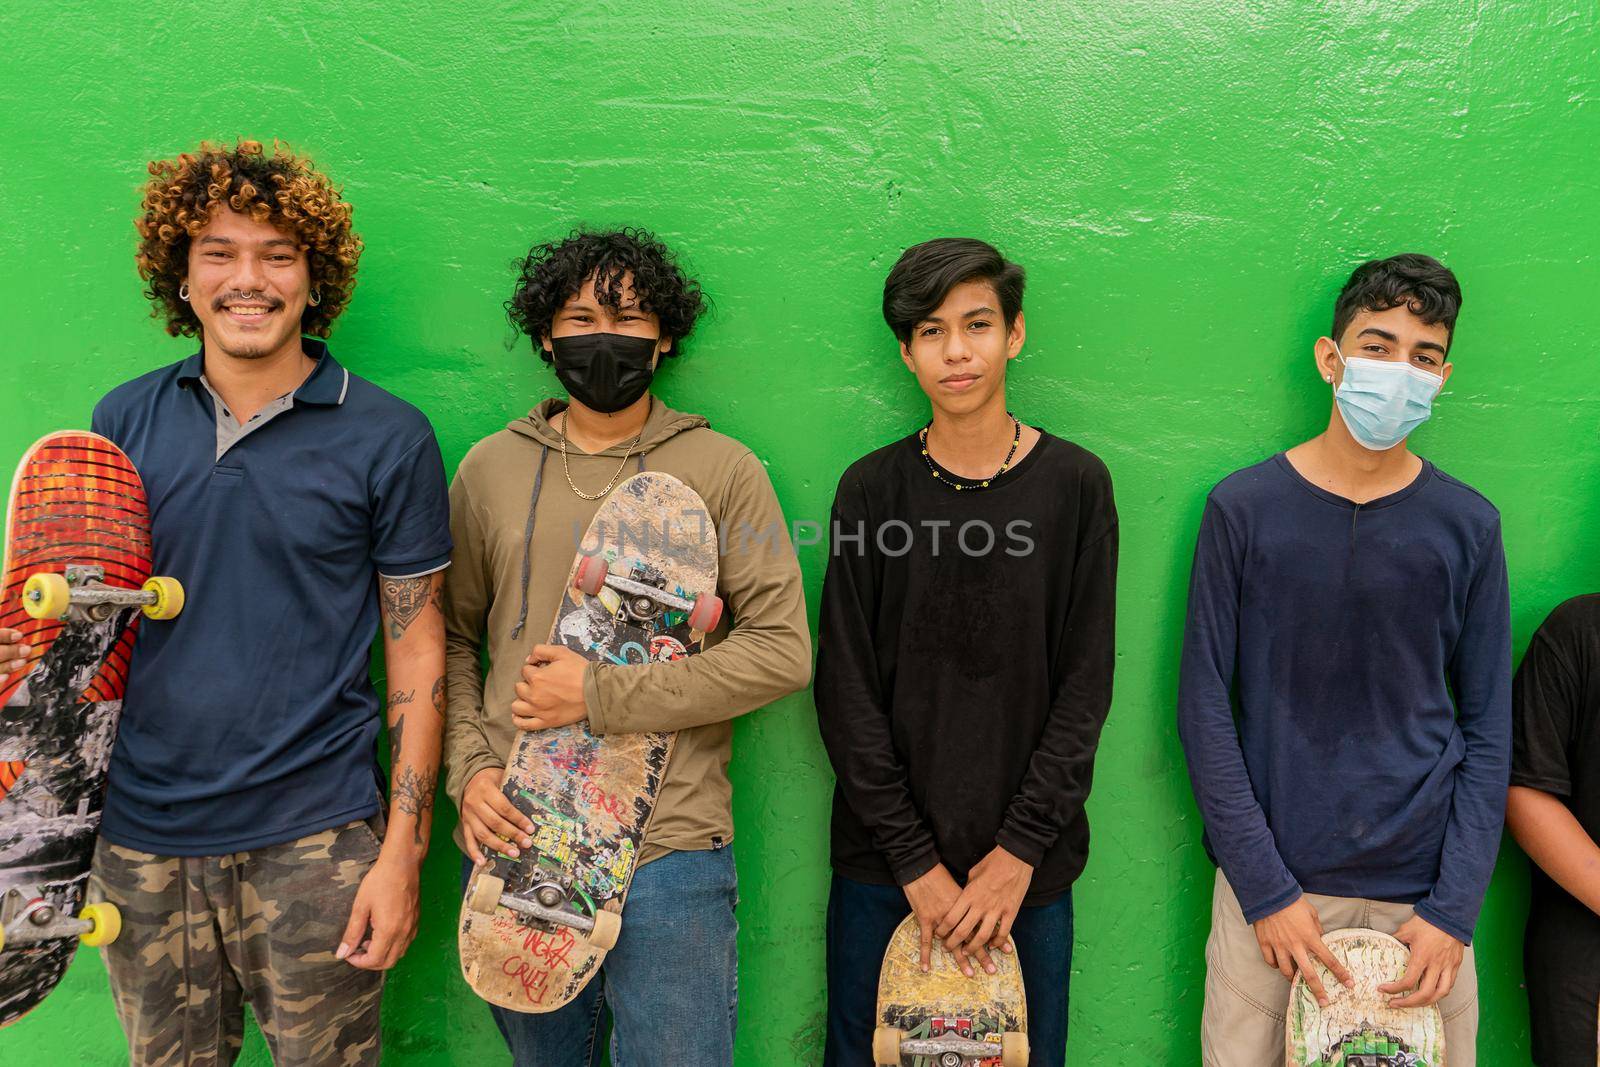 Latino teenagers leaning against a wall and looking at the camera smiling with their skate boards in their hands by cfalvarez